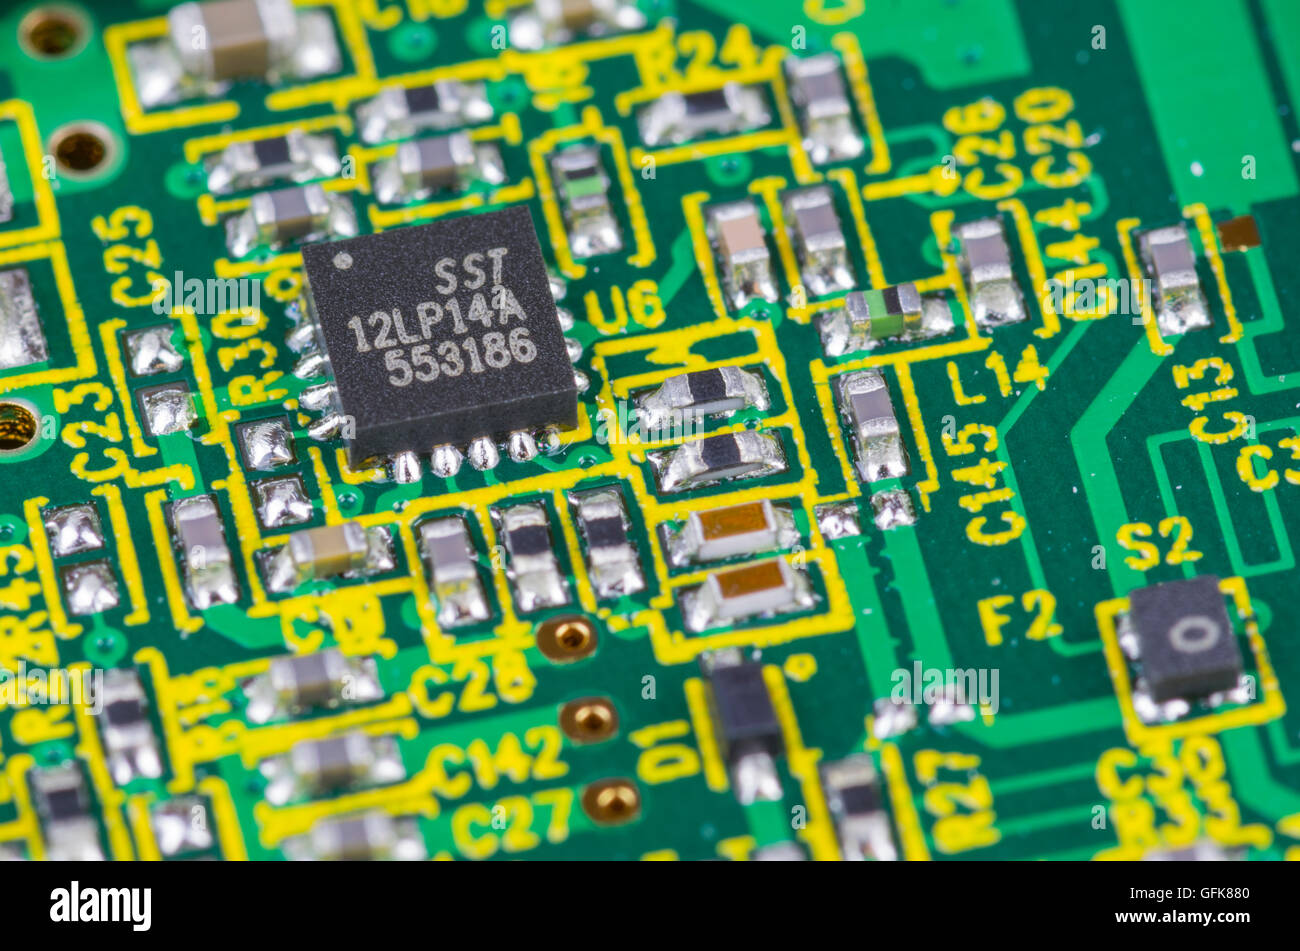 SST microchip on an electronics printed circuit board. Stock Photo